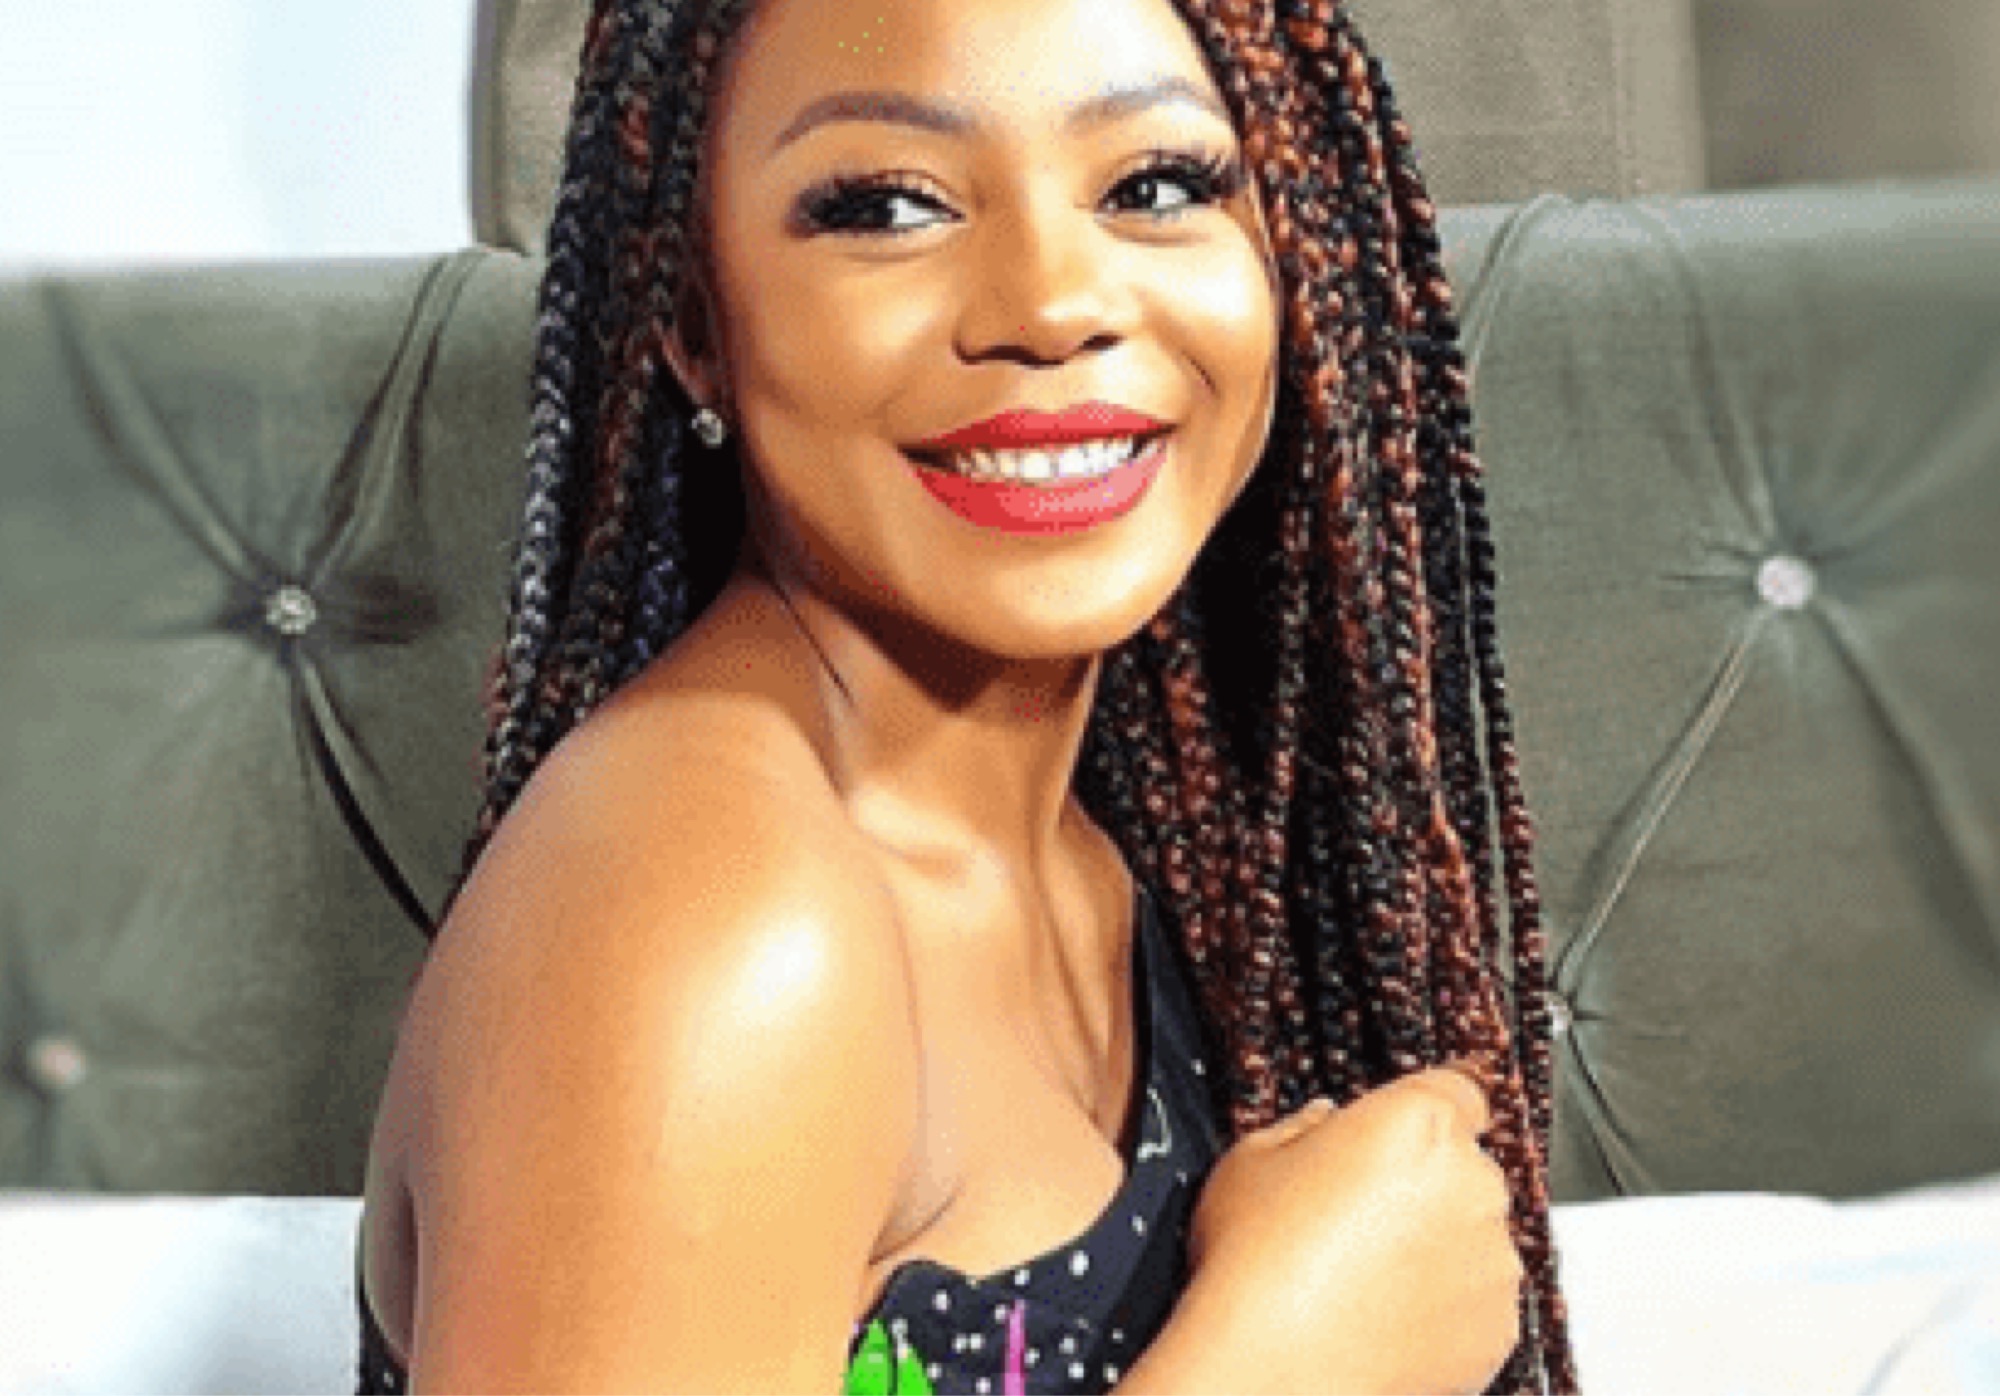 ‘I Think I’m Cursed When It Comes To Men’ – BBNaija’s Ifu Ennada Shares Her Plight